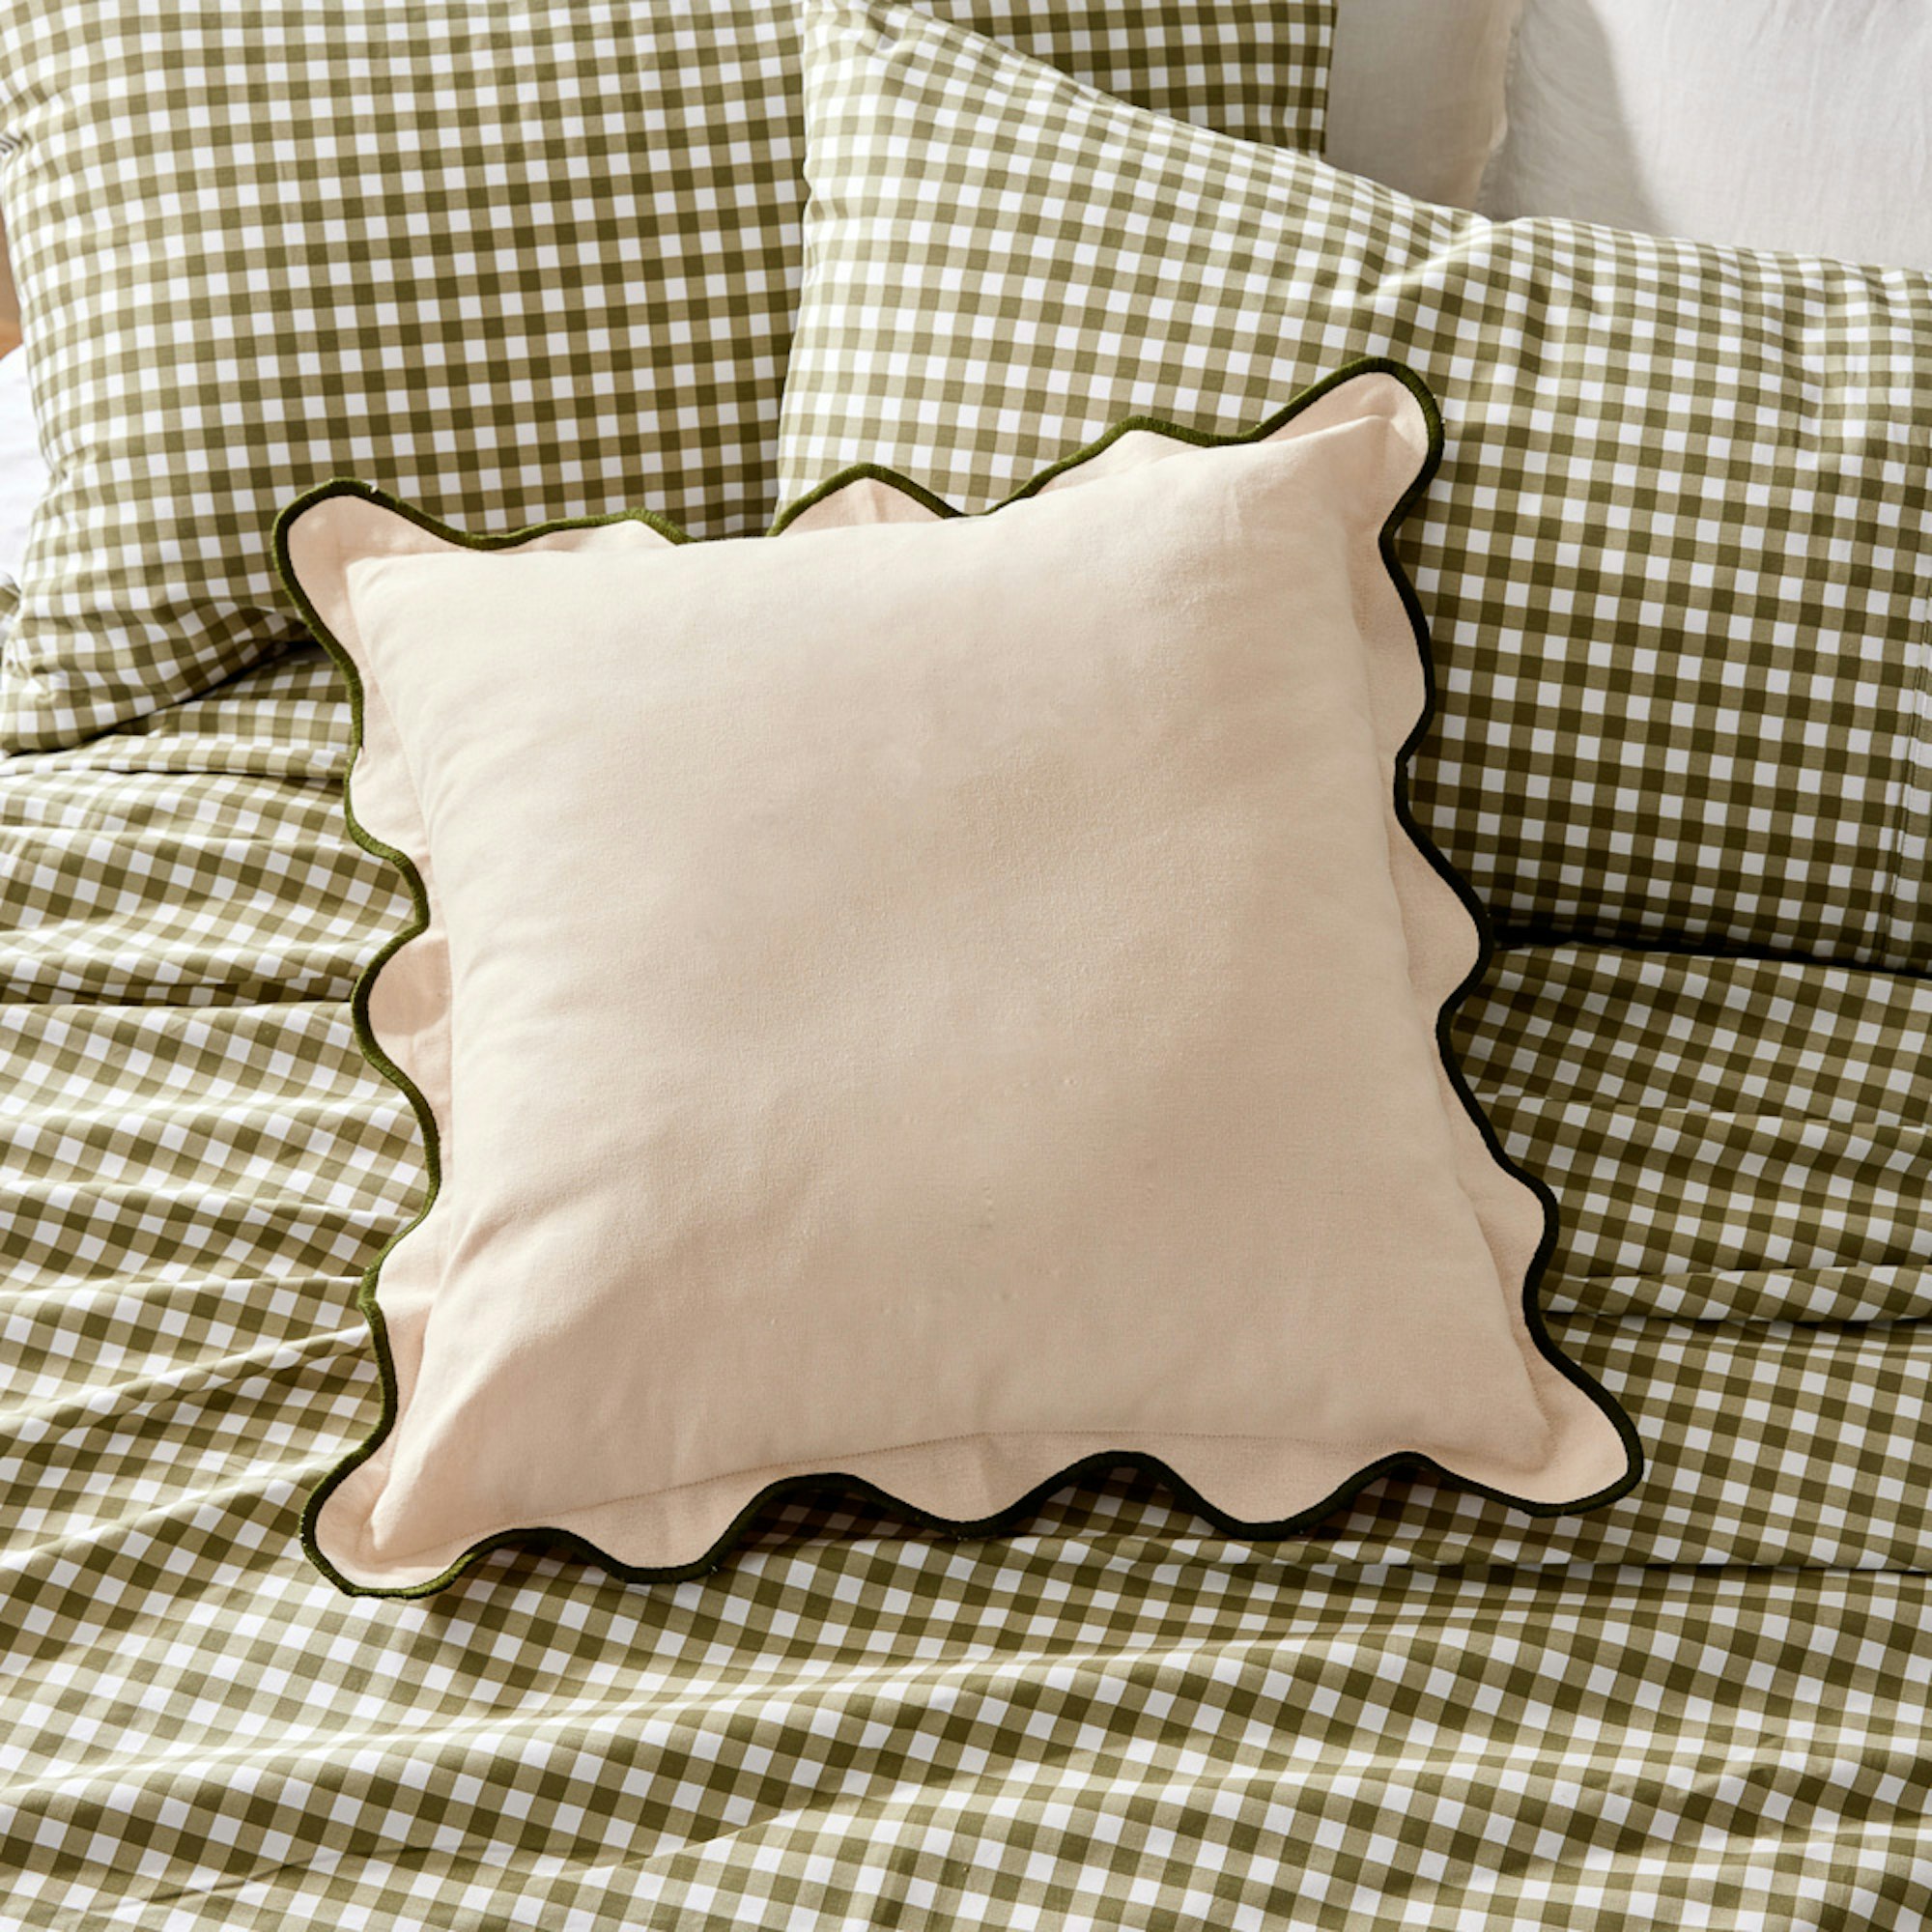 MyHouse SS23 collection. Lola cushion. scallop edged cushion in natural sitting on top of bed with green and white gingham sheets.